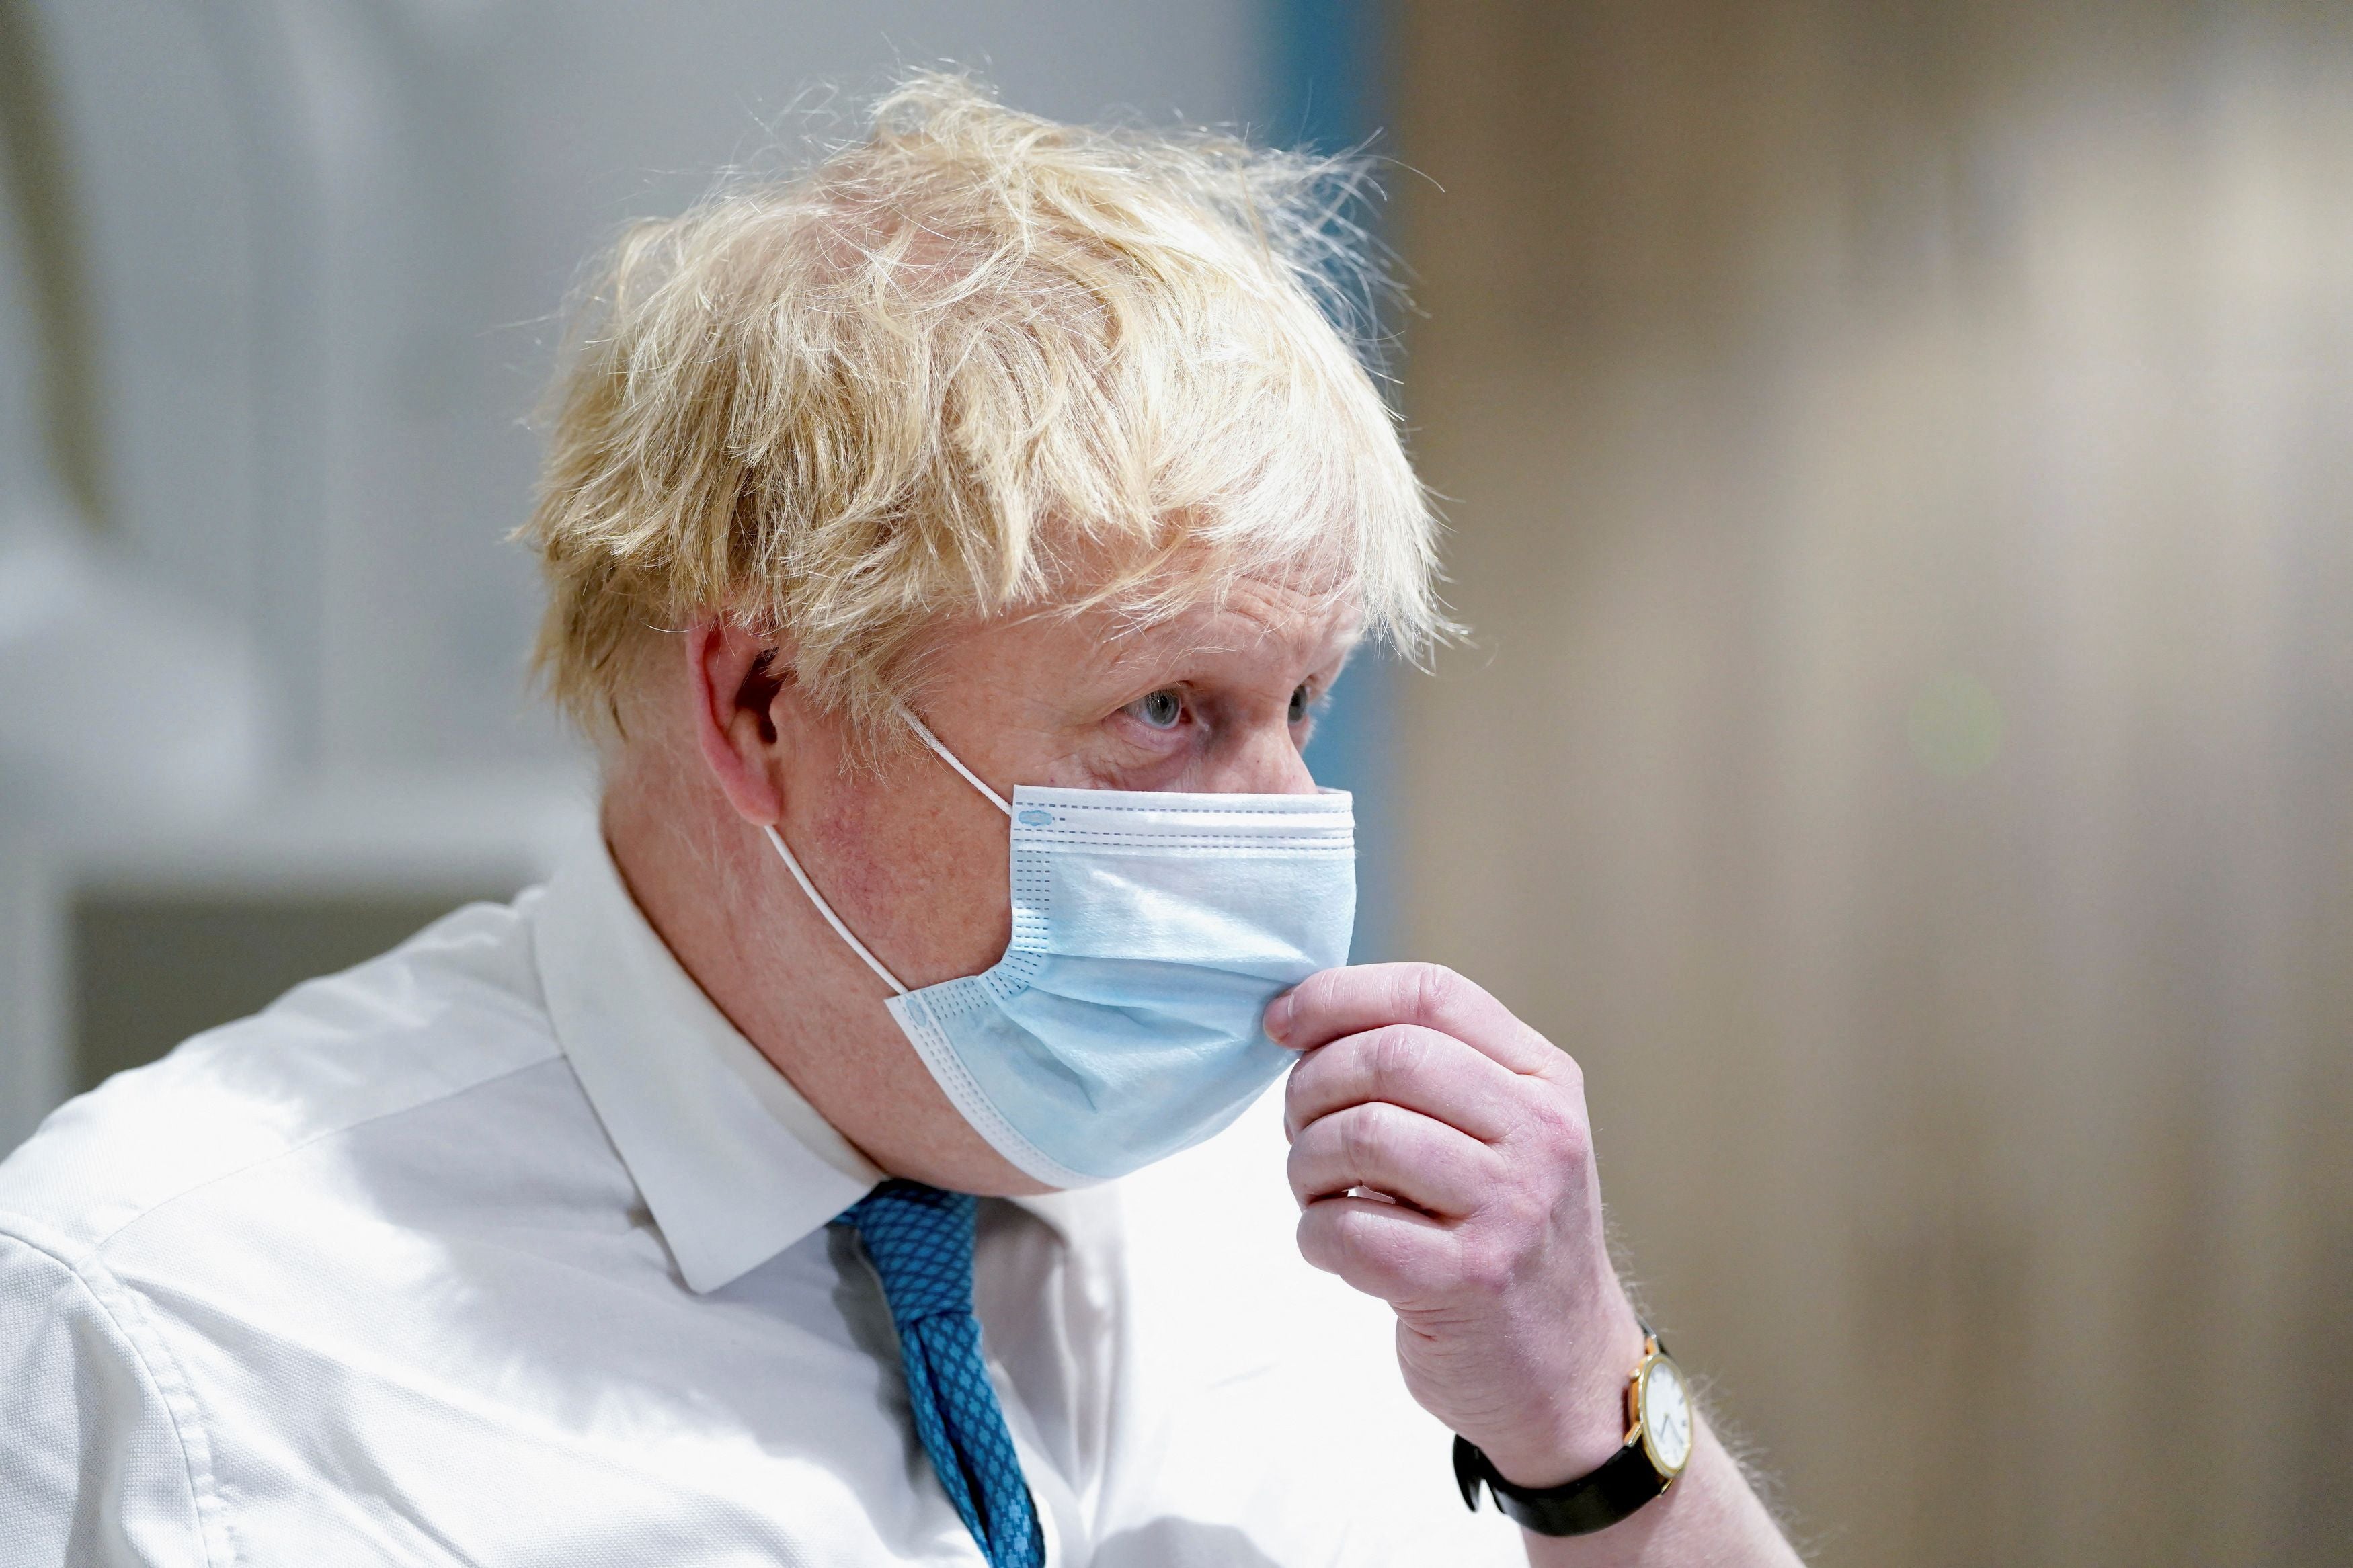 Boris Johnson wanted to “let the bodies pile high” to avoid imposing a second Covid lockdown, the inquiry heard